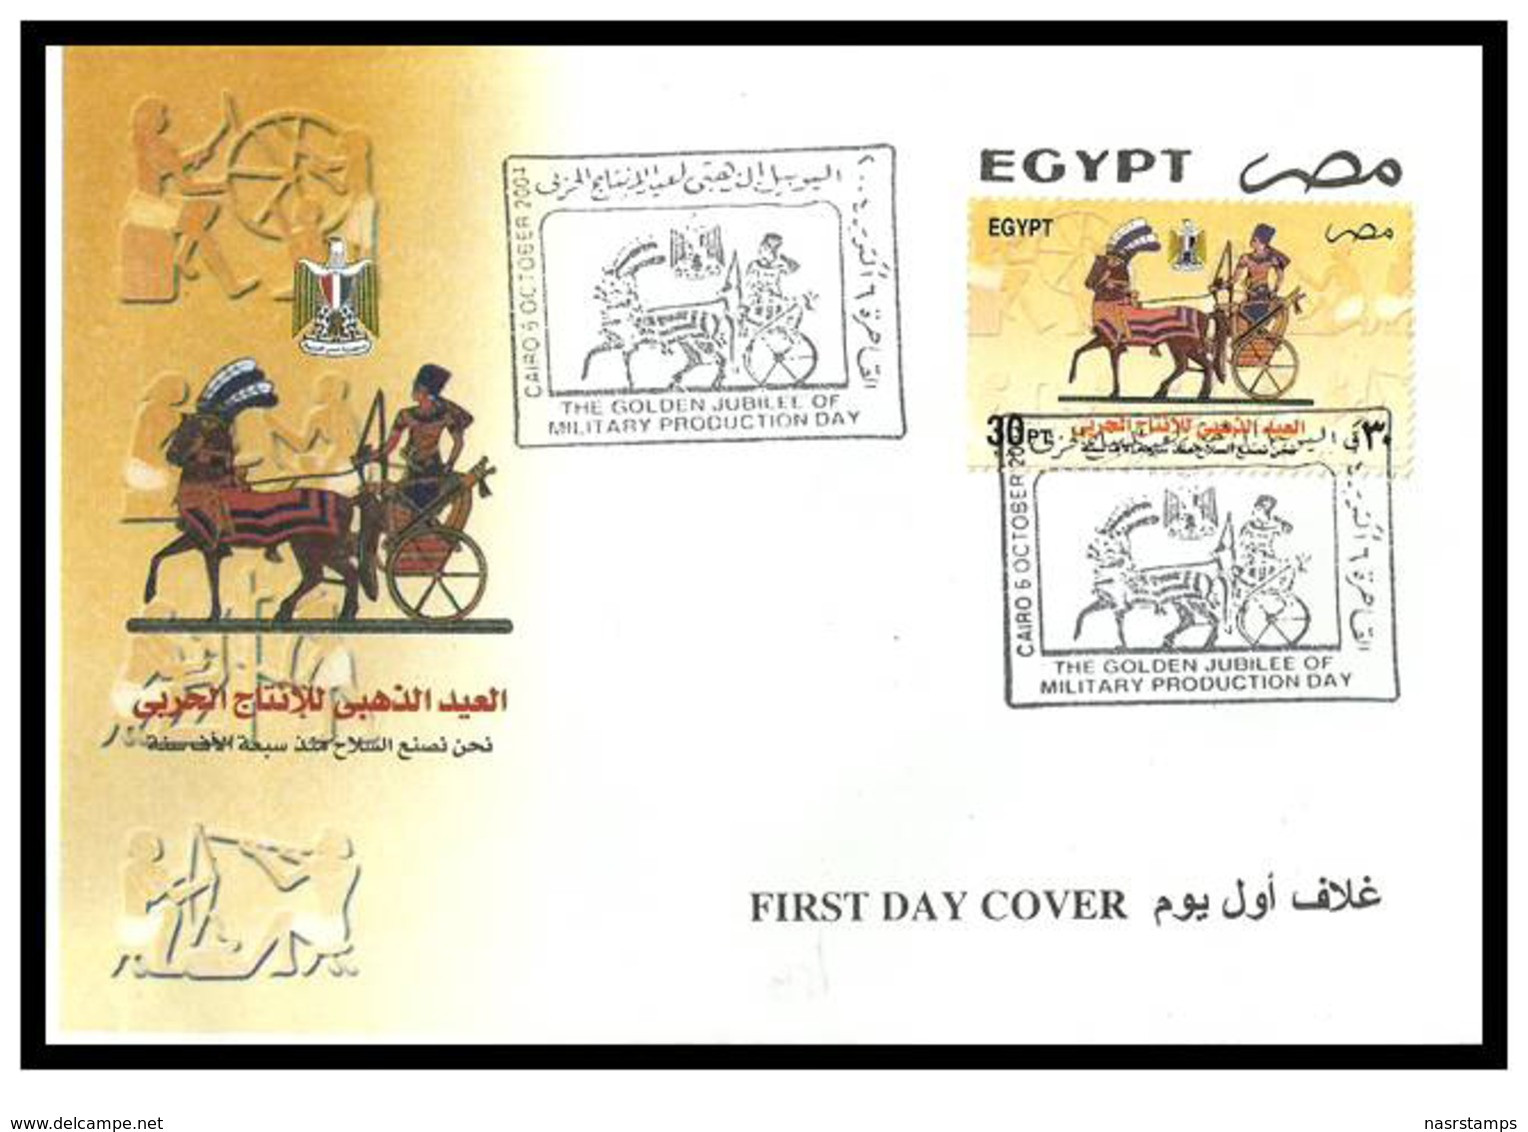 Egypt - 2004 - FDC - ( Military Production Day, 50th Anniv. ) - Covers & Documents